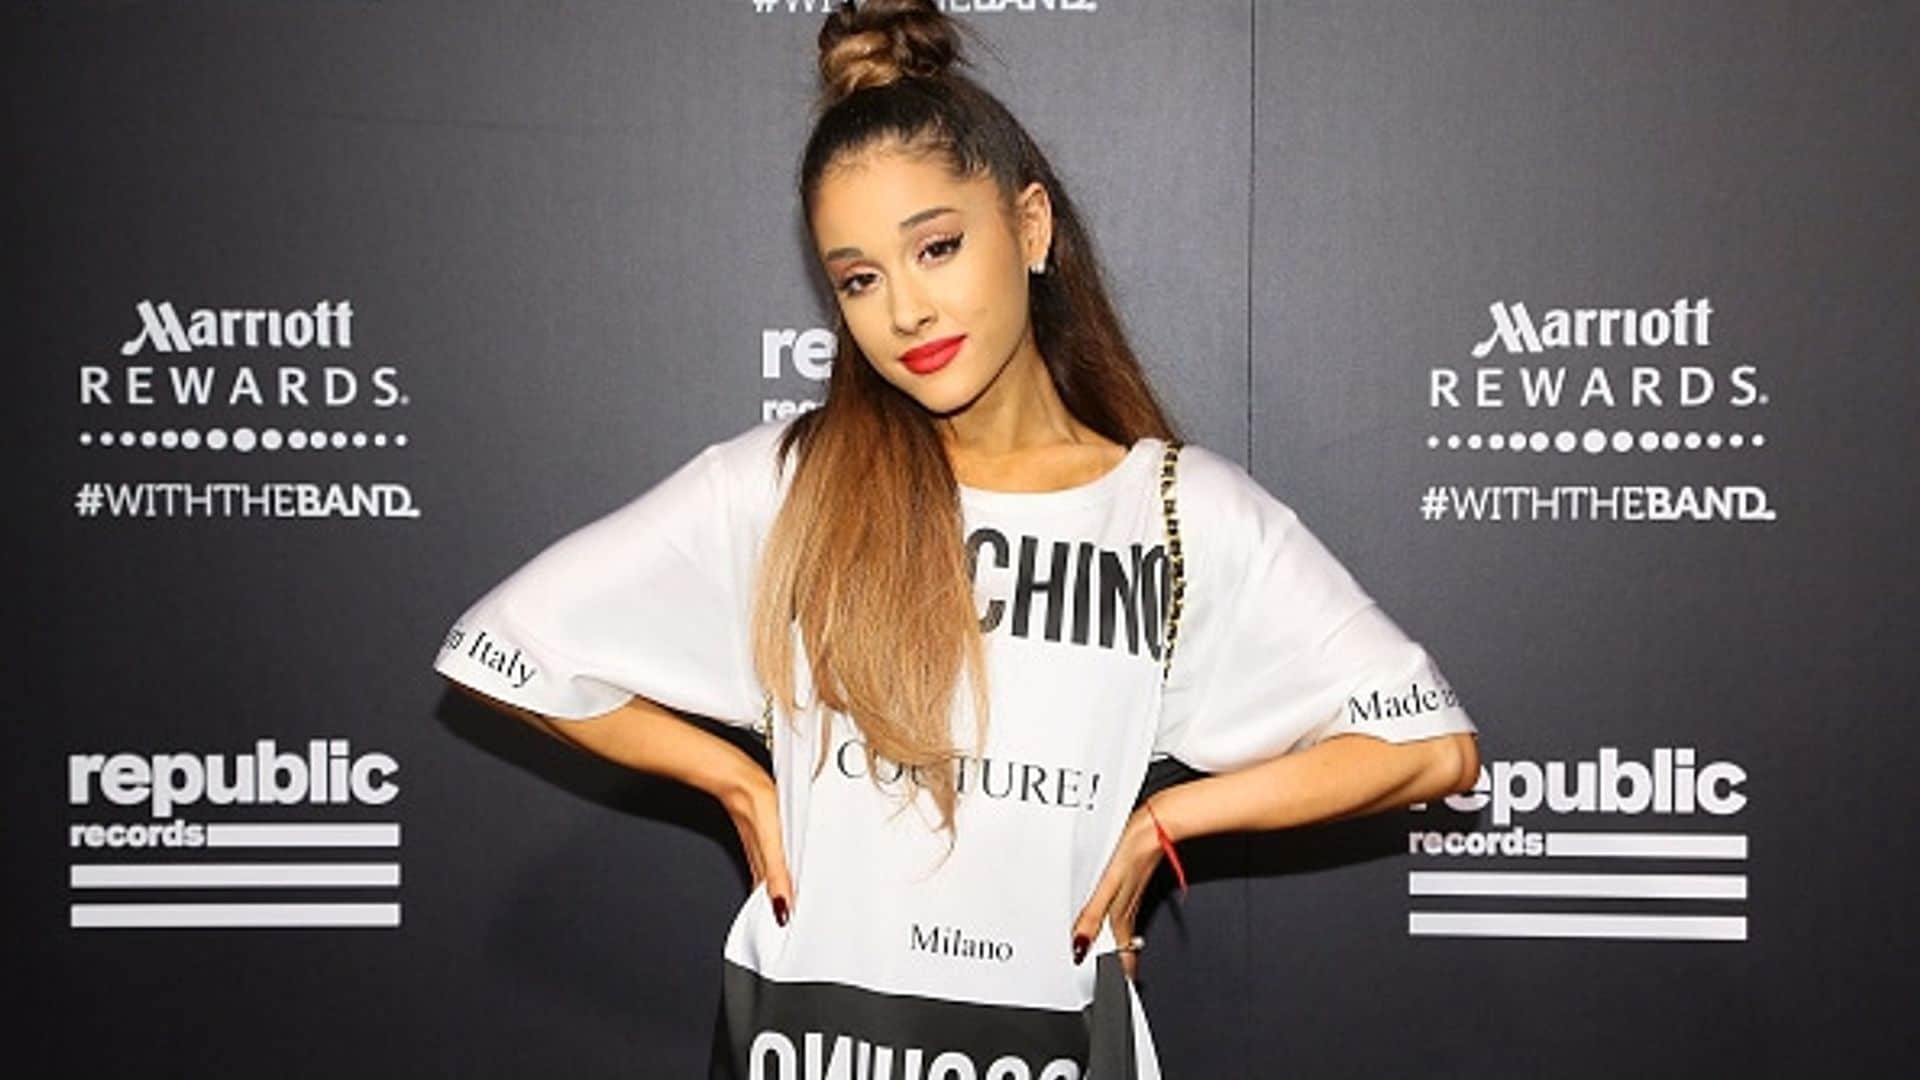 Ariana Grande channels Celine Dion, Britney Spears and Christina Aguilera